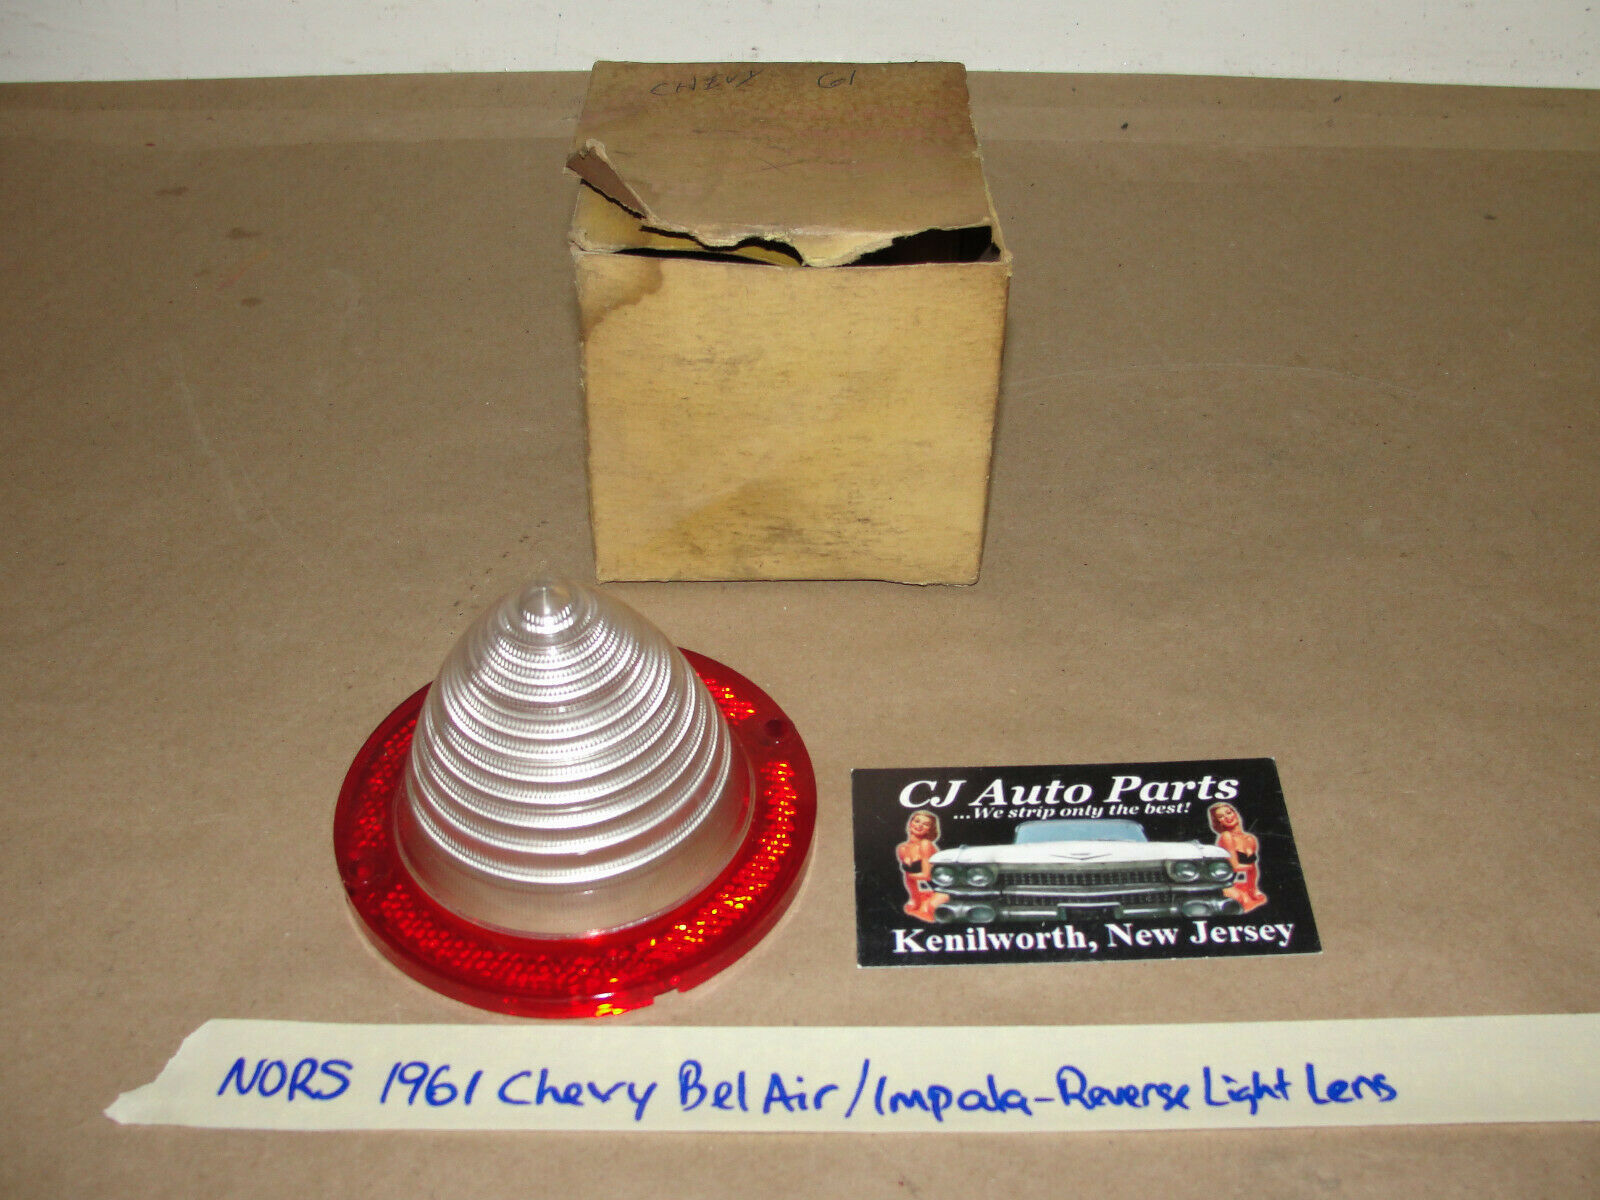 NOS/NORS 1961 CHEVY BEL AIR IMPALA BISCAYNE REVERSE BACK UP LIGHT LENS - £23.48 GBP